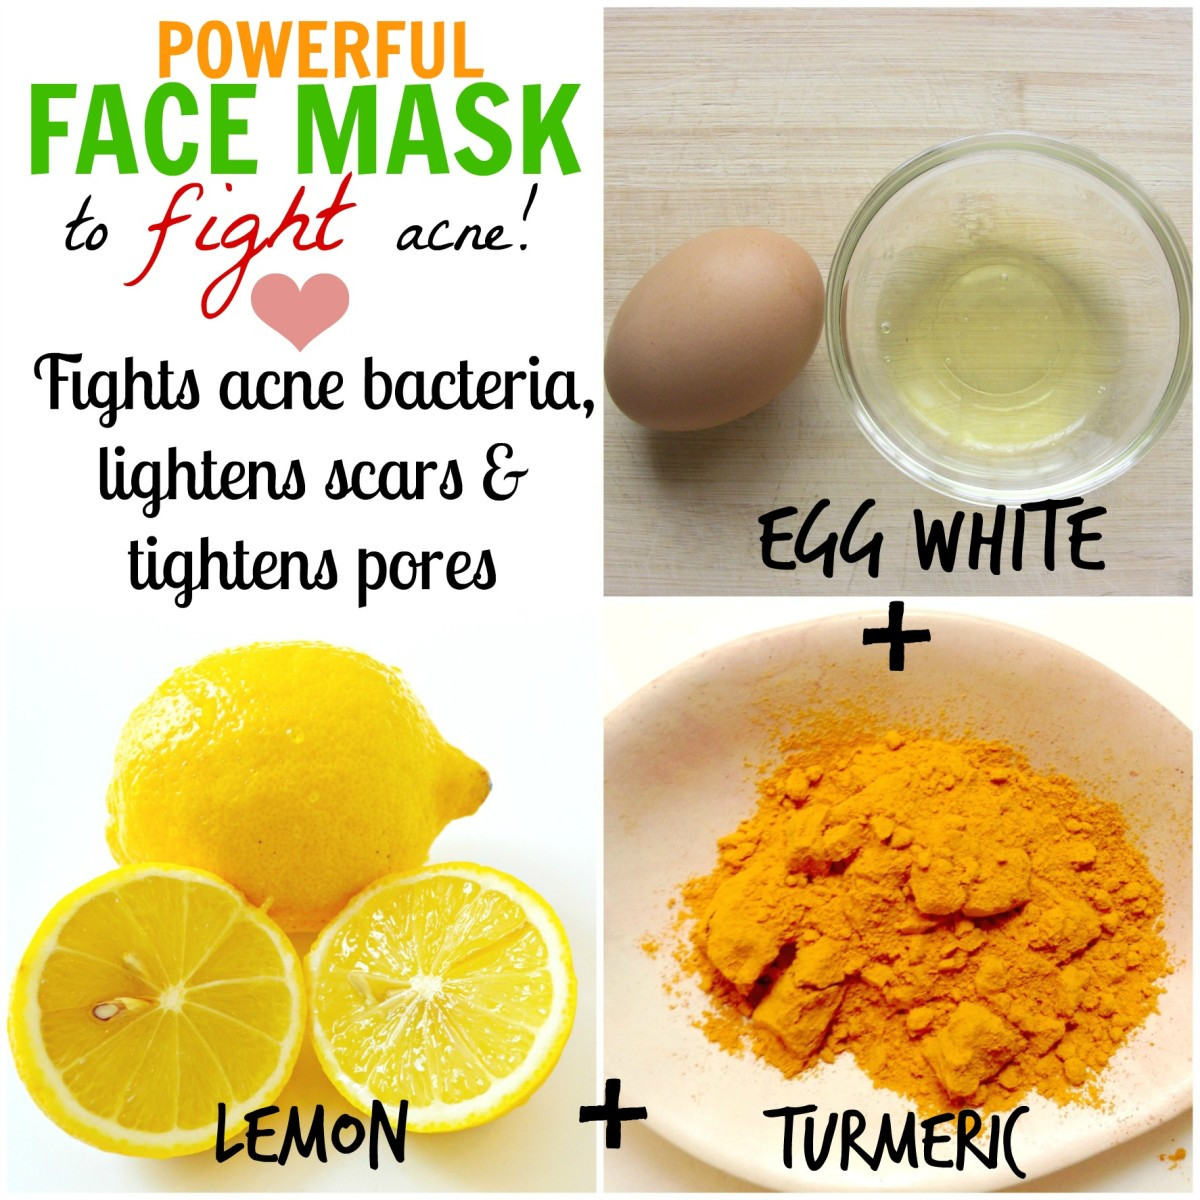 DIY Face Mask Acne
 DIY Homemade Face Masks for Acne How to Stop Pimples